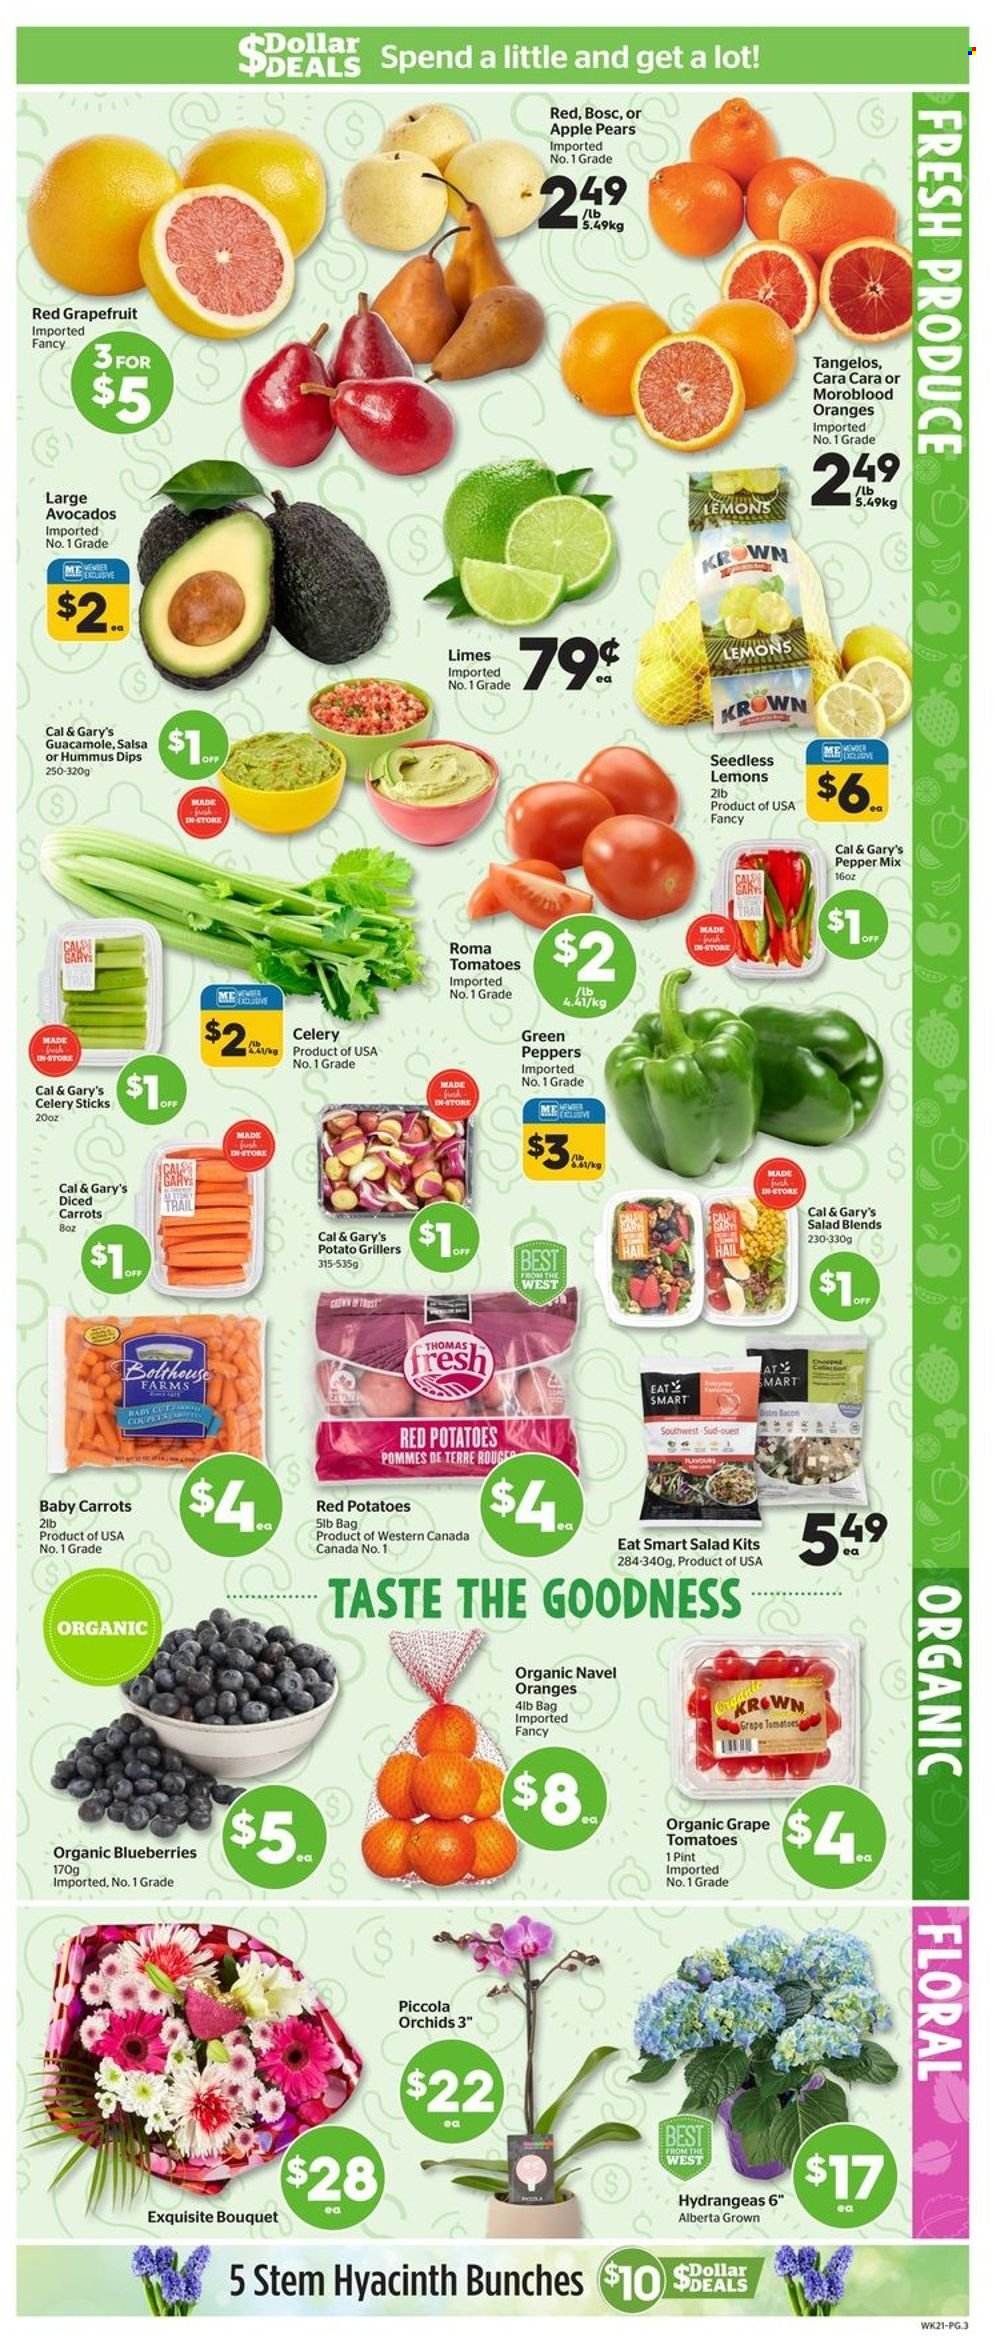 thumbnail - Calgary Co-op Flyer - March 23, 2023 - March 29, 2023 - Sales products - carrots, tomatoes, potatoes, salad, peppers, red potatoes, blueberries, grapefruits, limes, tangelos, pears, oranges, lemons, navel oranges, bacon, hummus, guacamole, celery sticks, pepper, salsa, Trust. Page 3.